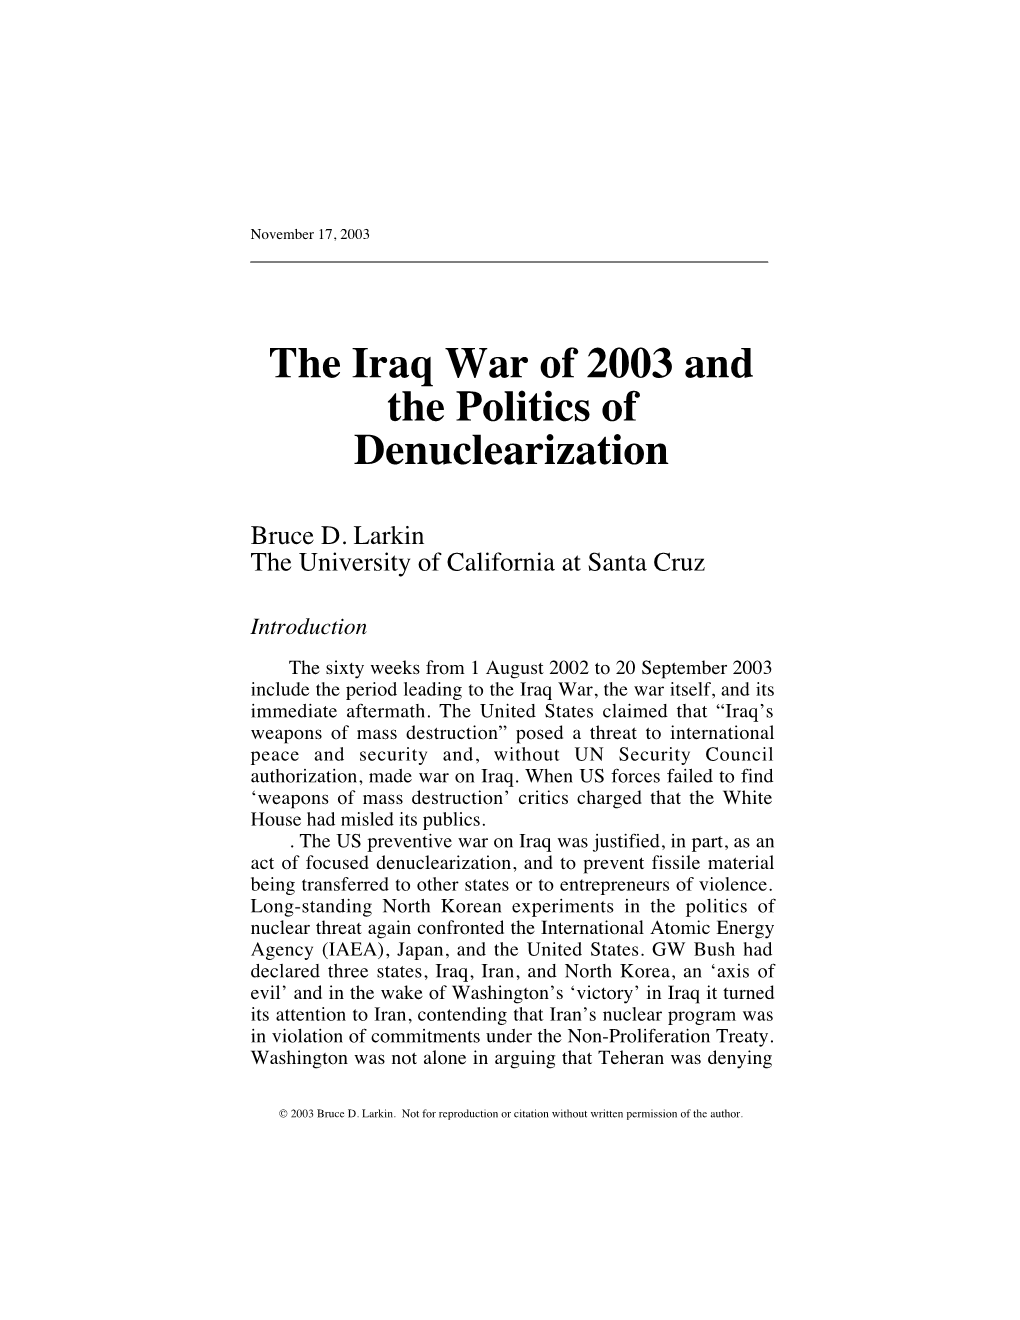 The Iraq War of 2003 and the Politics of Denuclearization